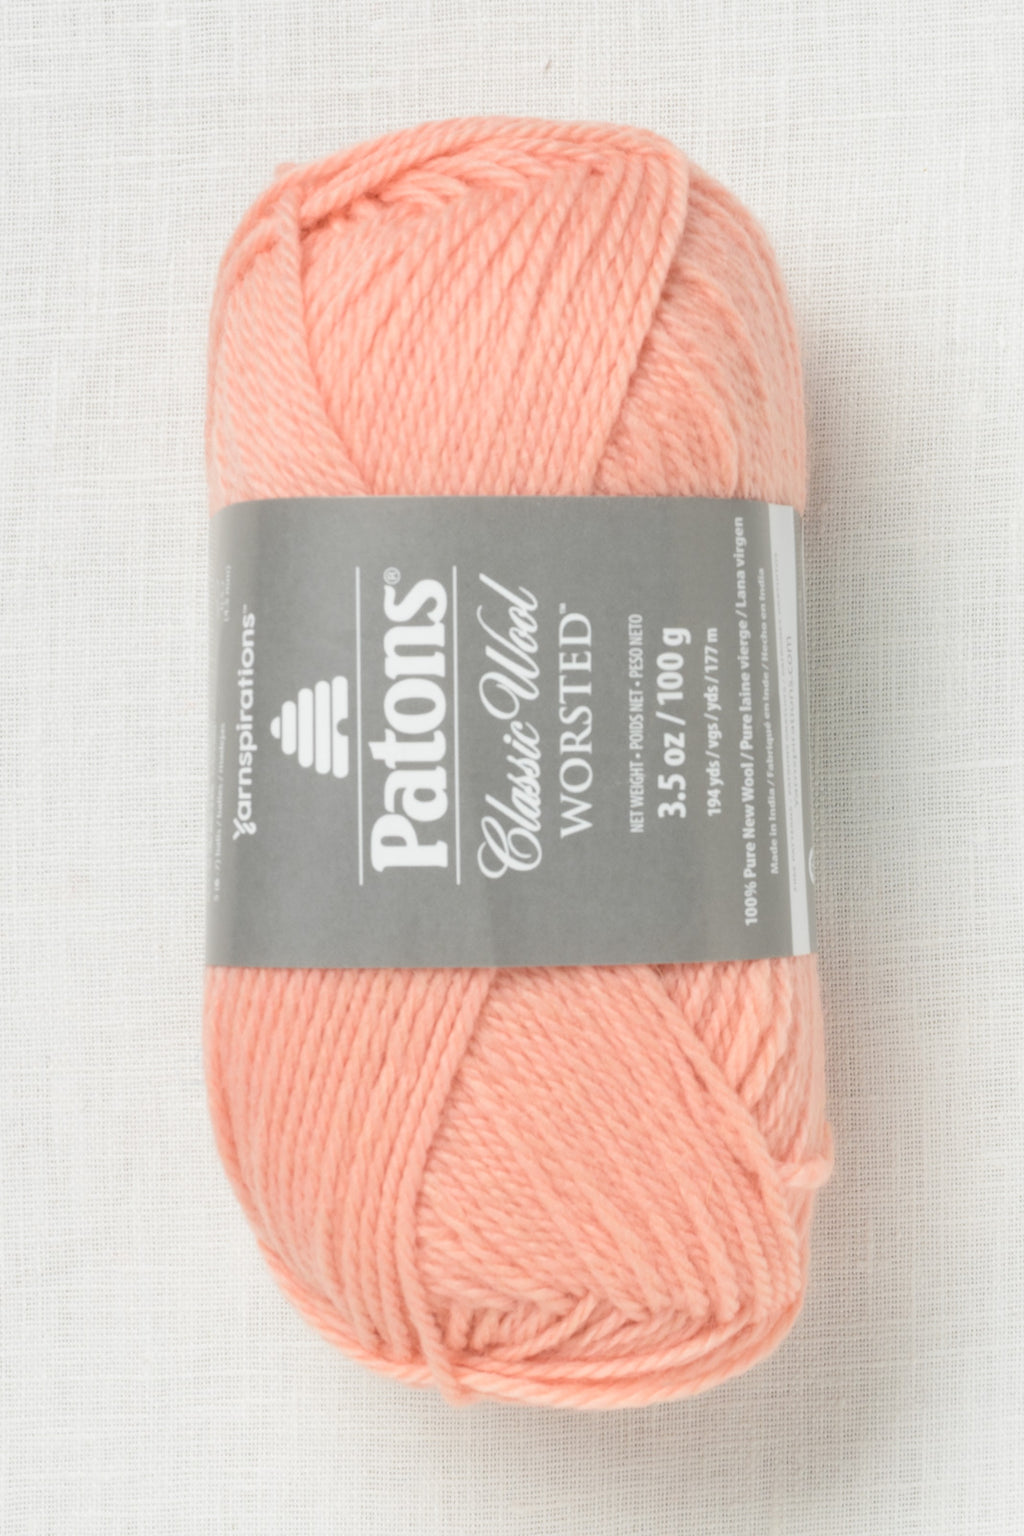 Patons Classic Wool Worsted Peach Blush